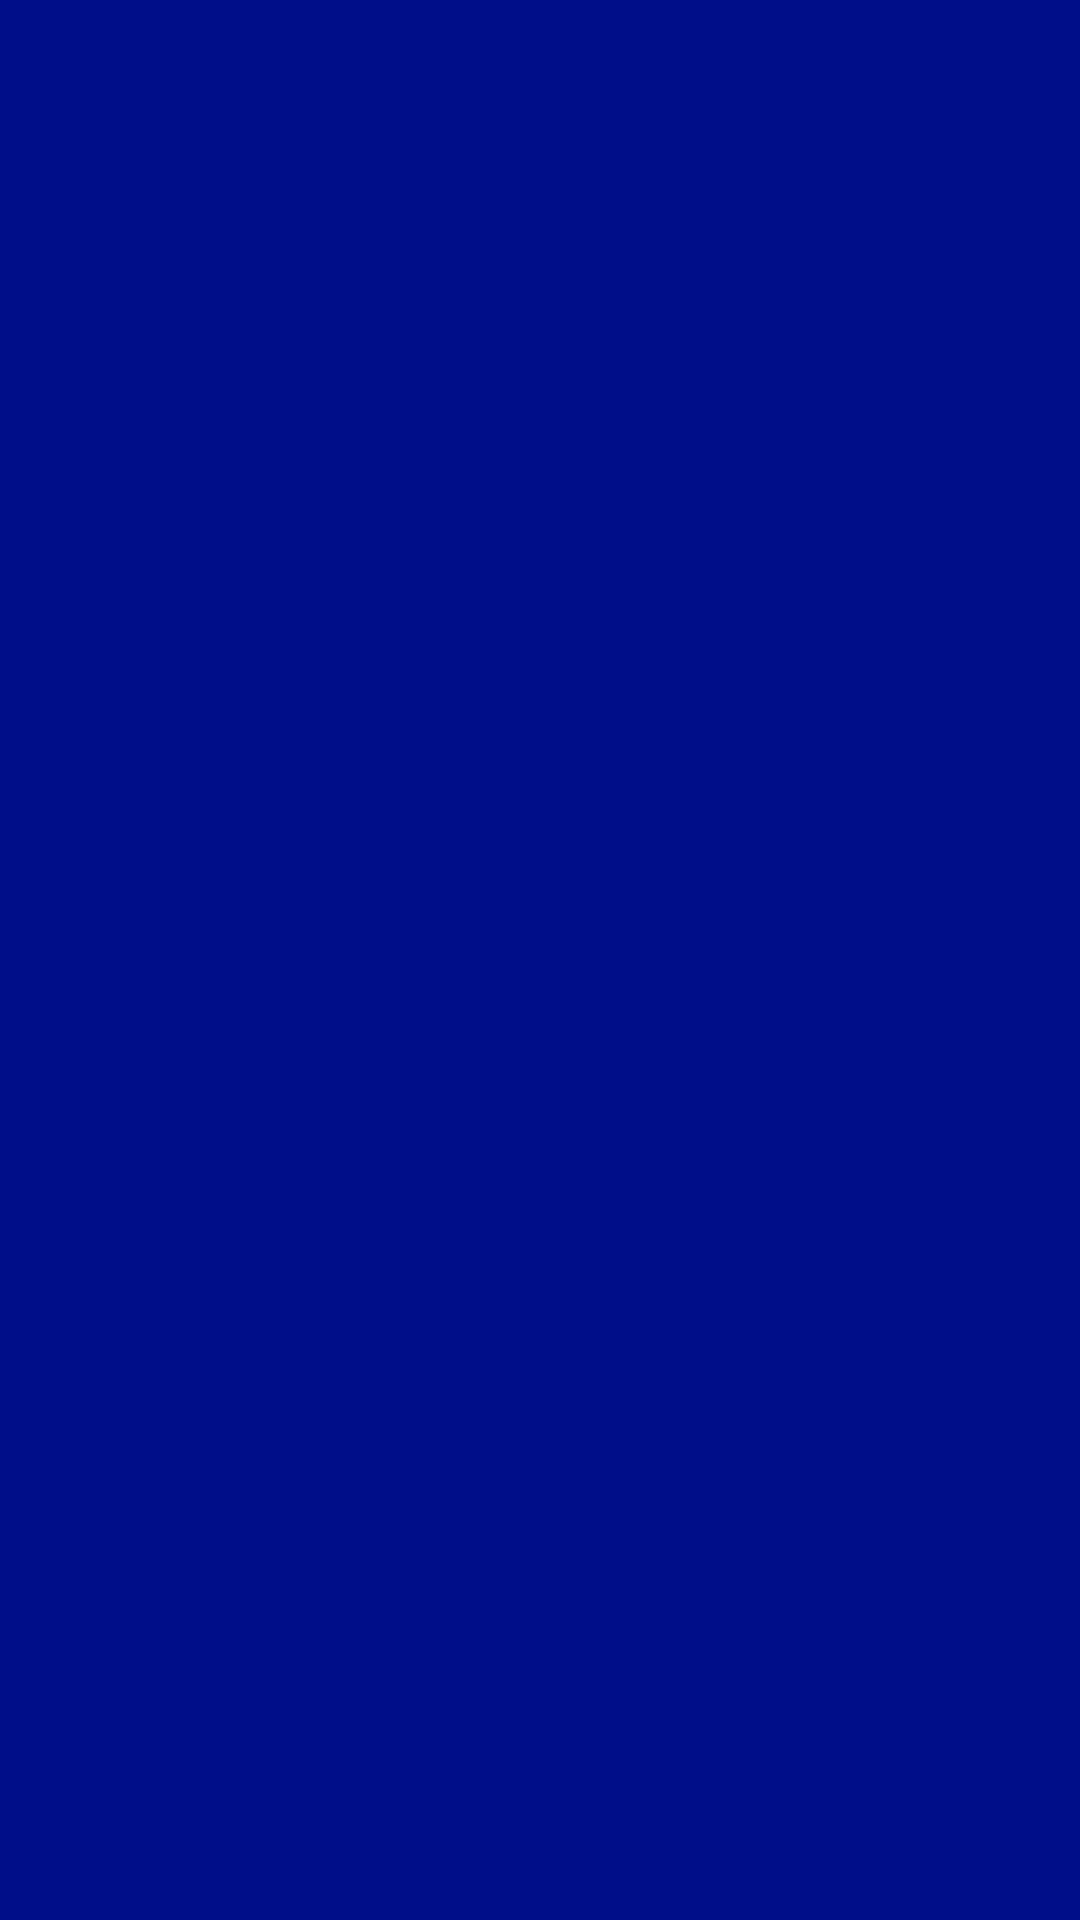 1080x1920 Phthalo Blue Solid Color Background